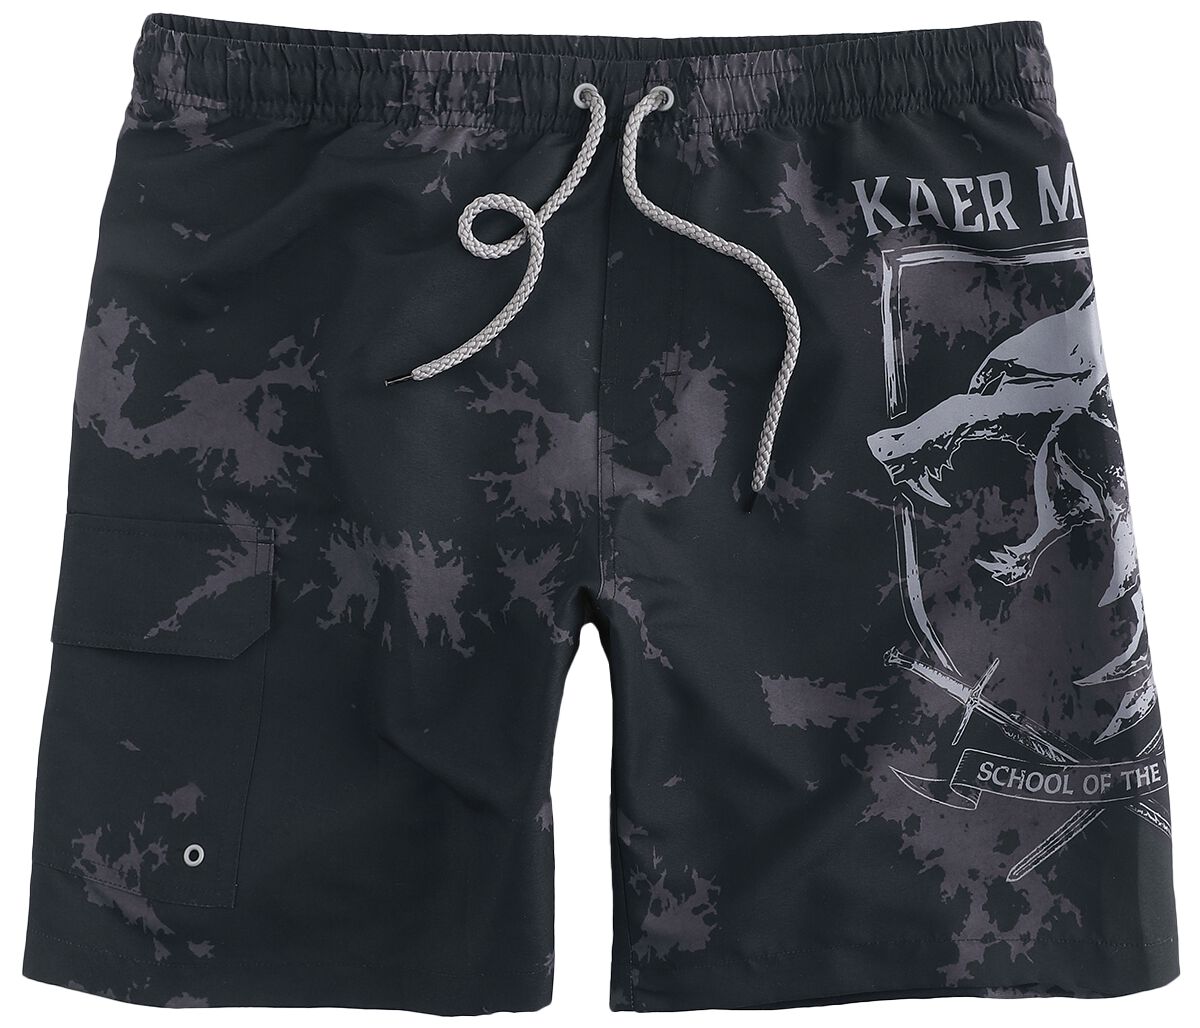 The Witcher The Witcher Badeshort multicolor in L